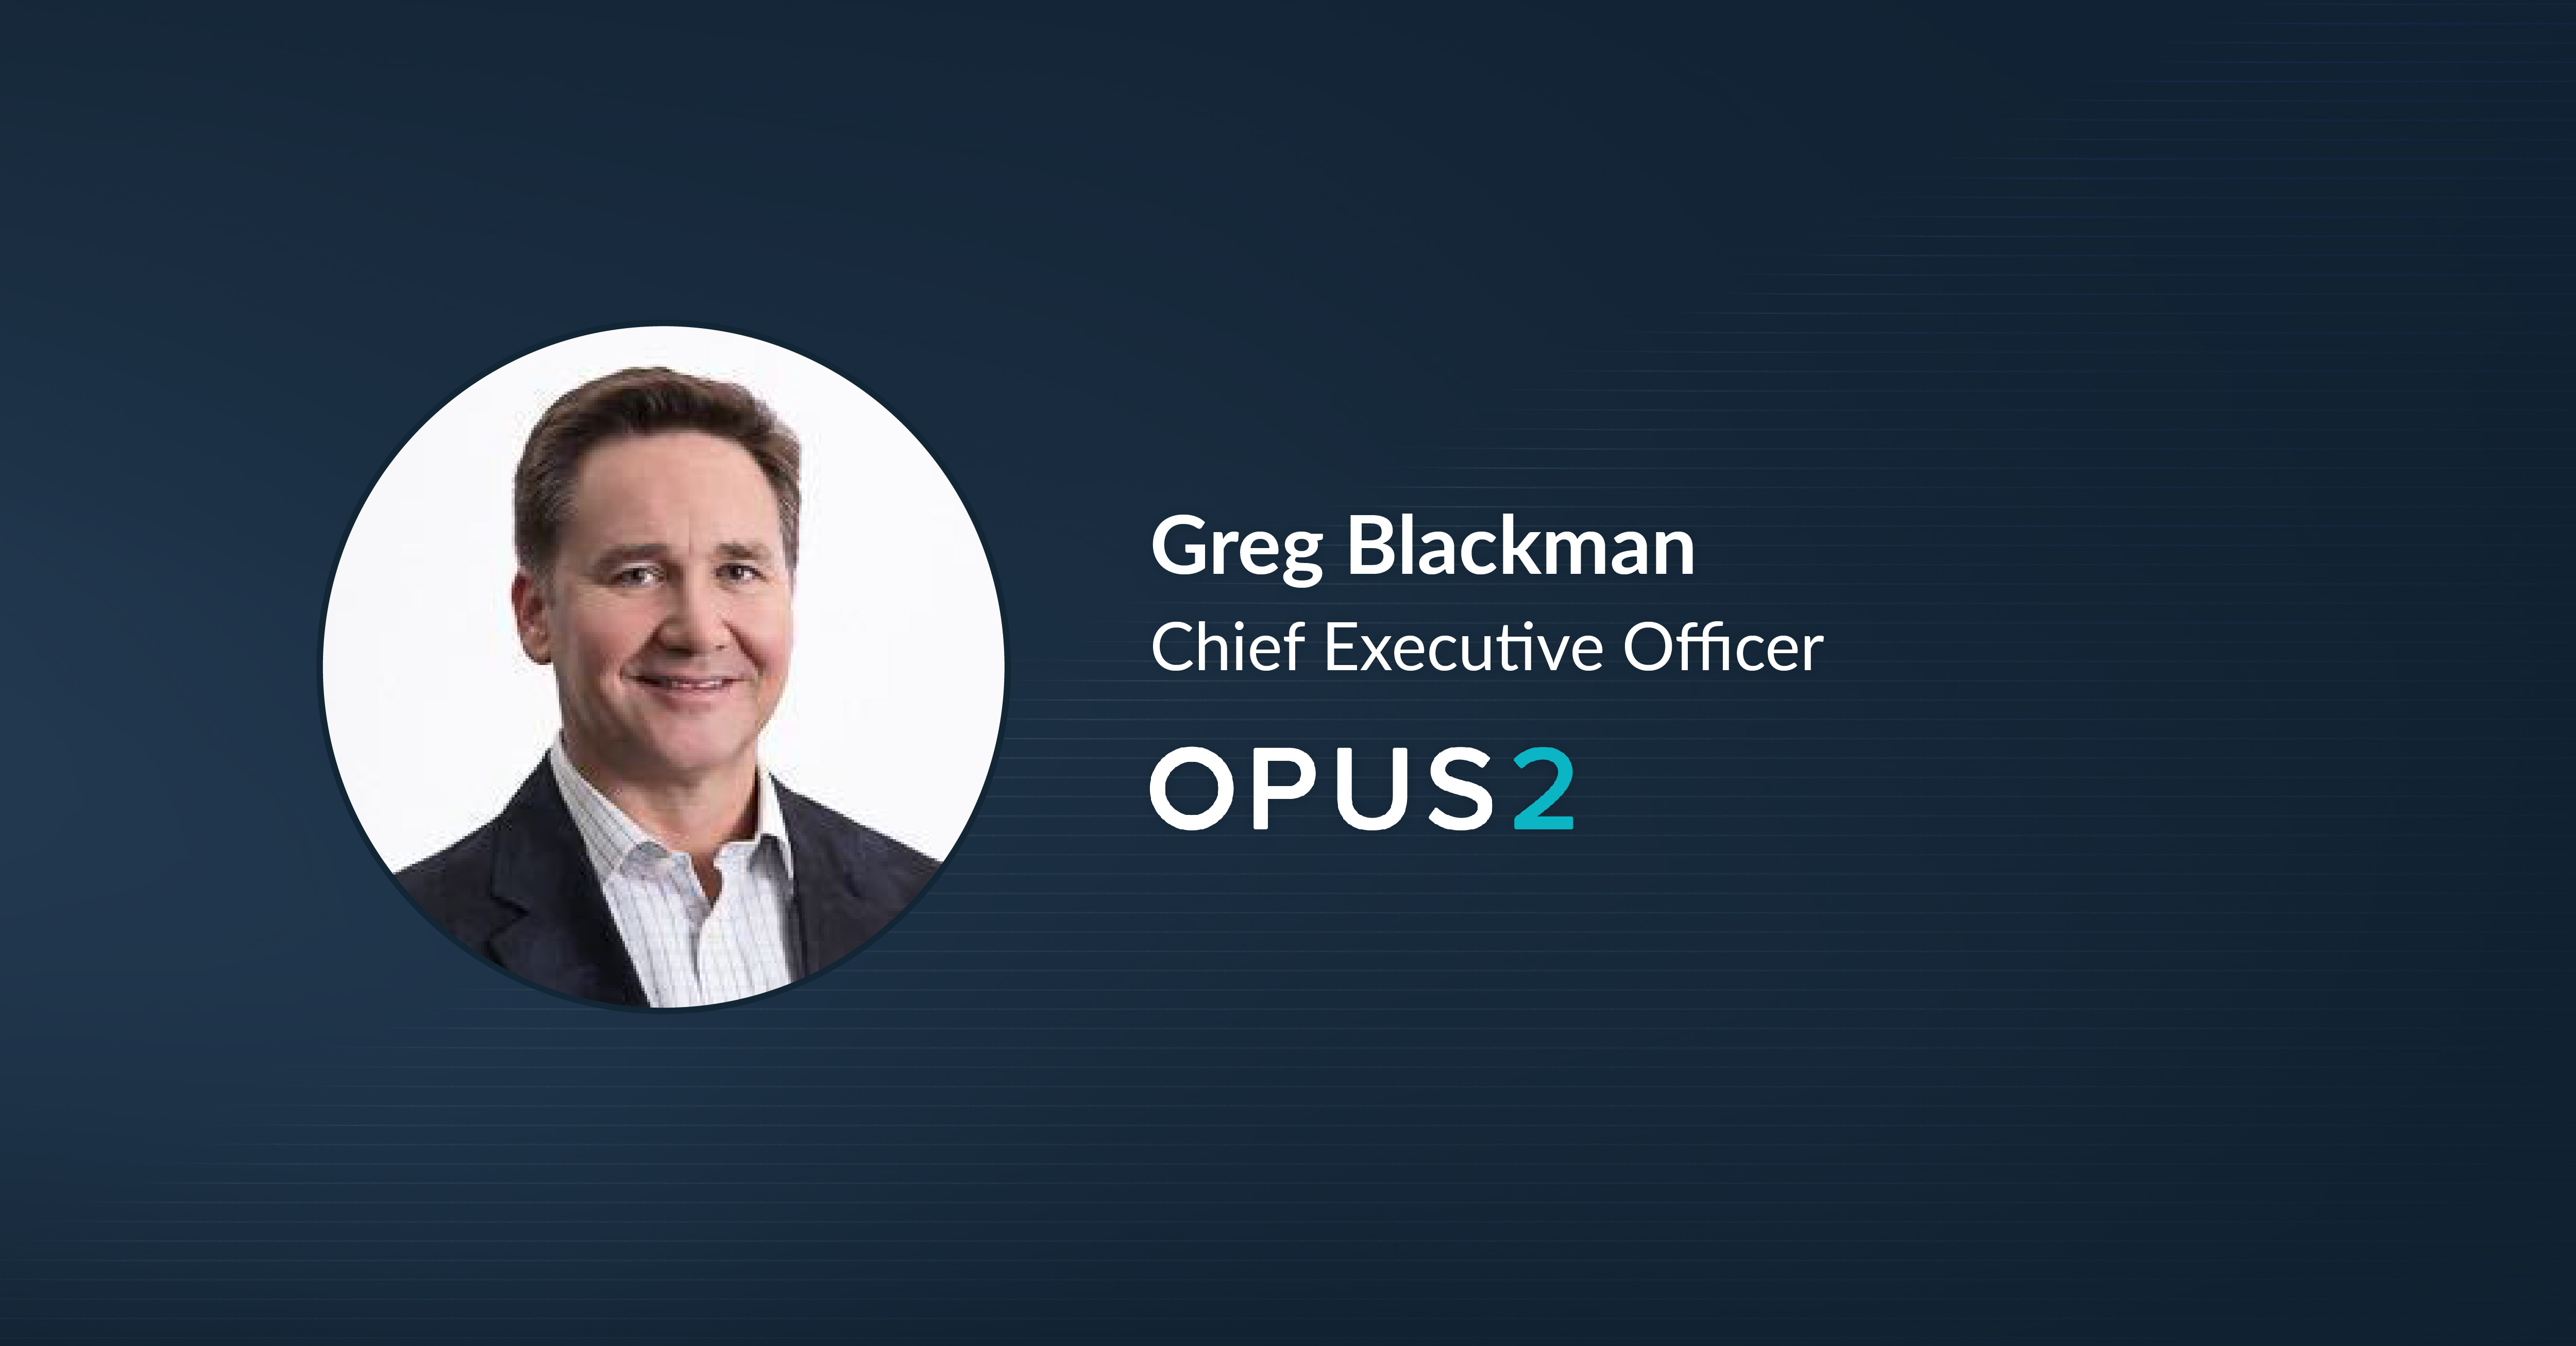 Greg Blackman Joins Opus 2 as CEO To Accelerate Global Growth